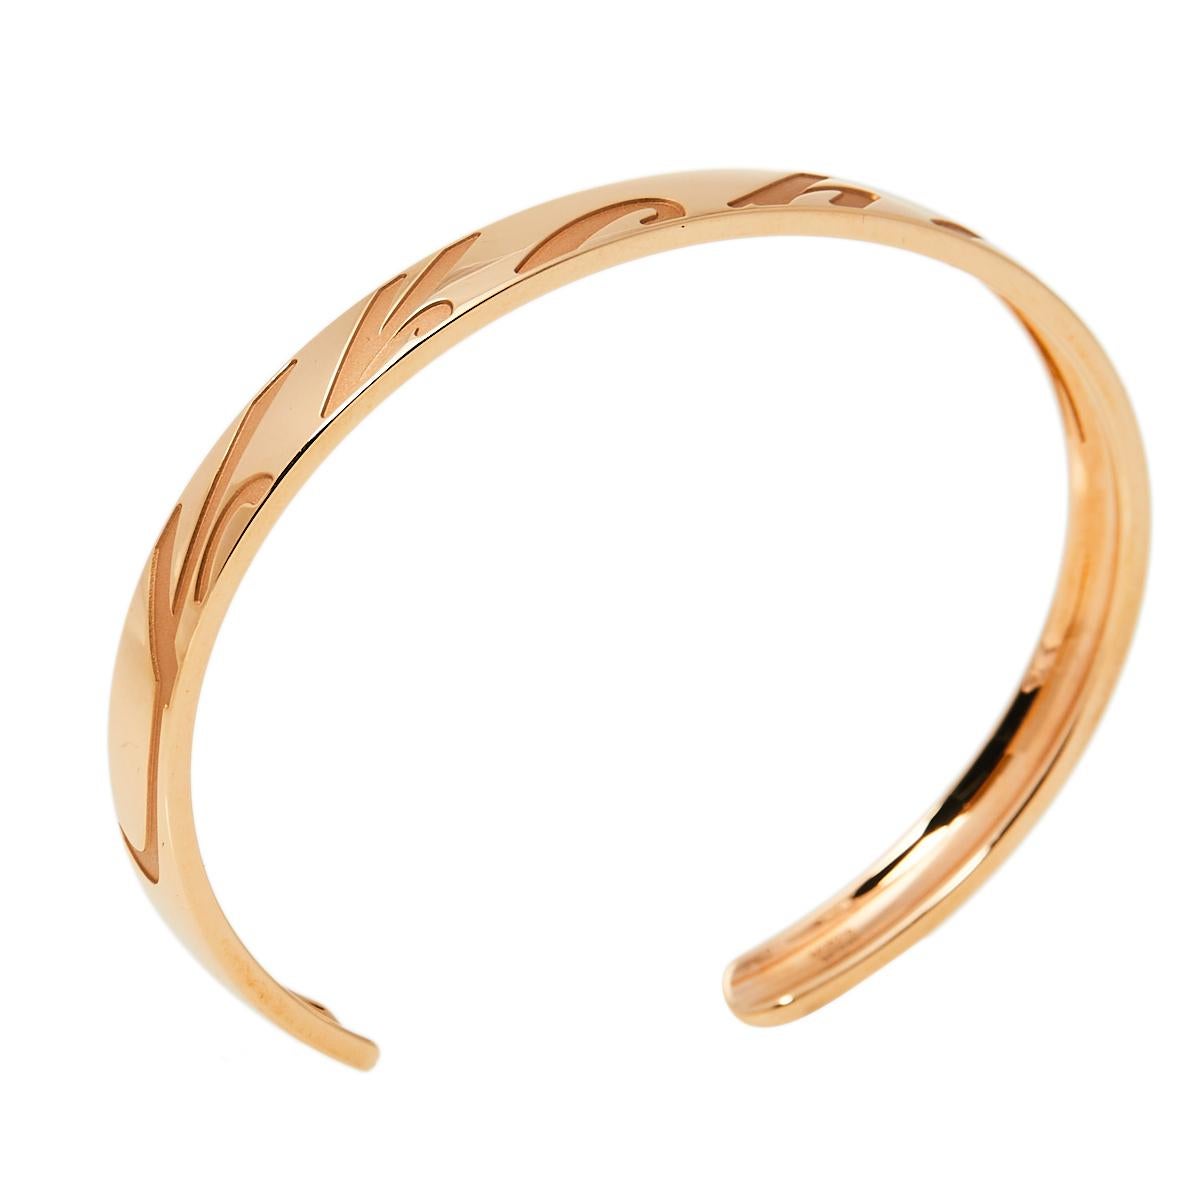 This creation from Chopard speaks luxury in a way that is minimal and elegant. The bracelet has been excellently crafted from 18k rose gold in an open cuff style. Set beautifully on the bracelet are cursive engravings of the brand's name, a